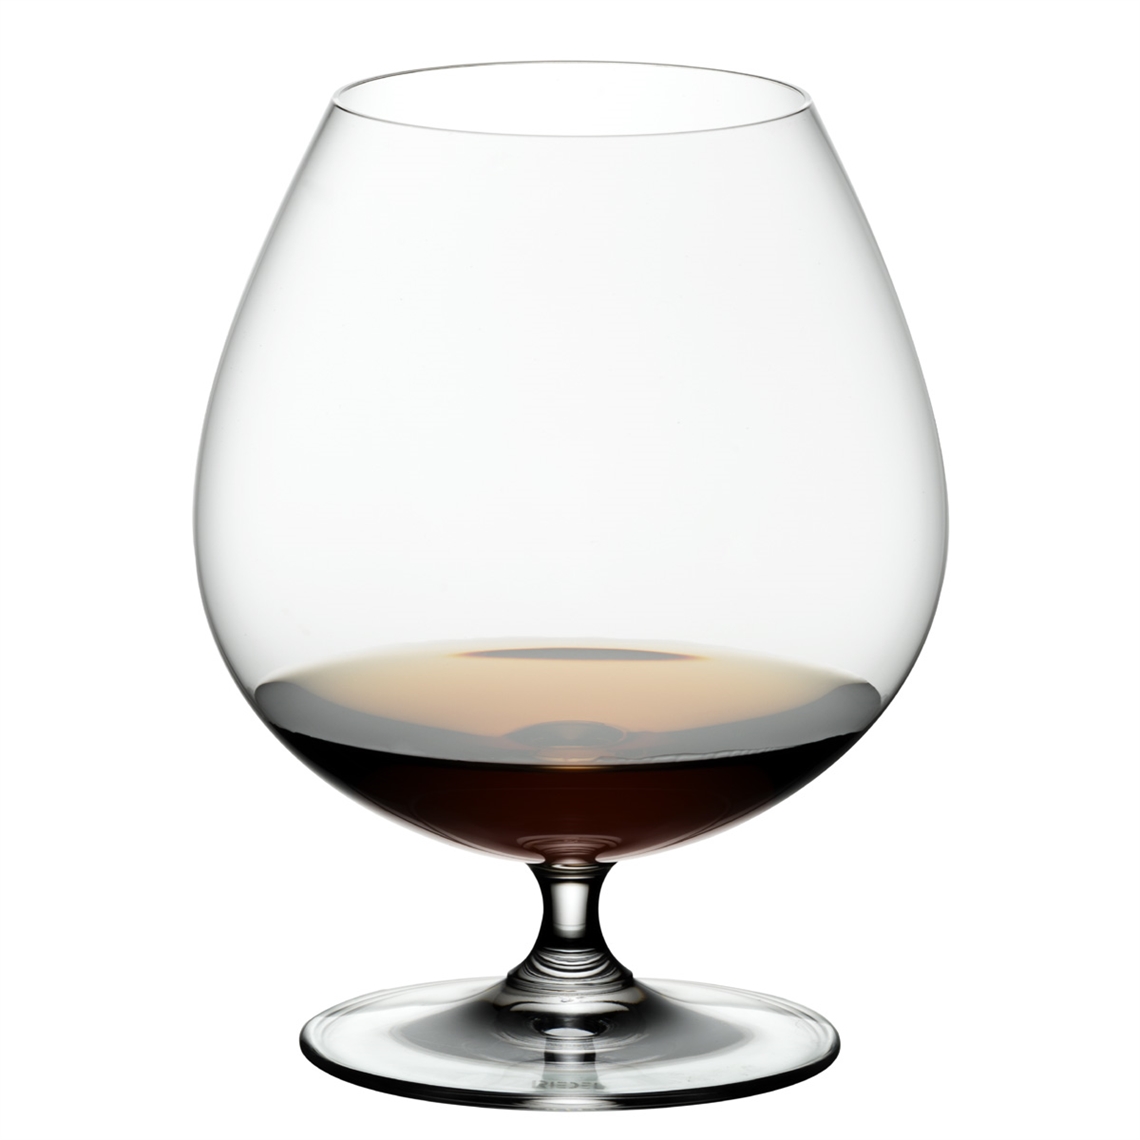 View more beginners guide to different types of wine glasses from our Spirit Glasses range